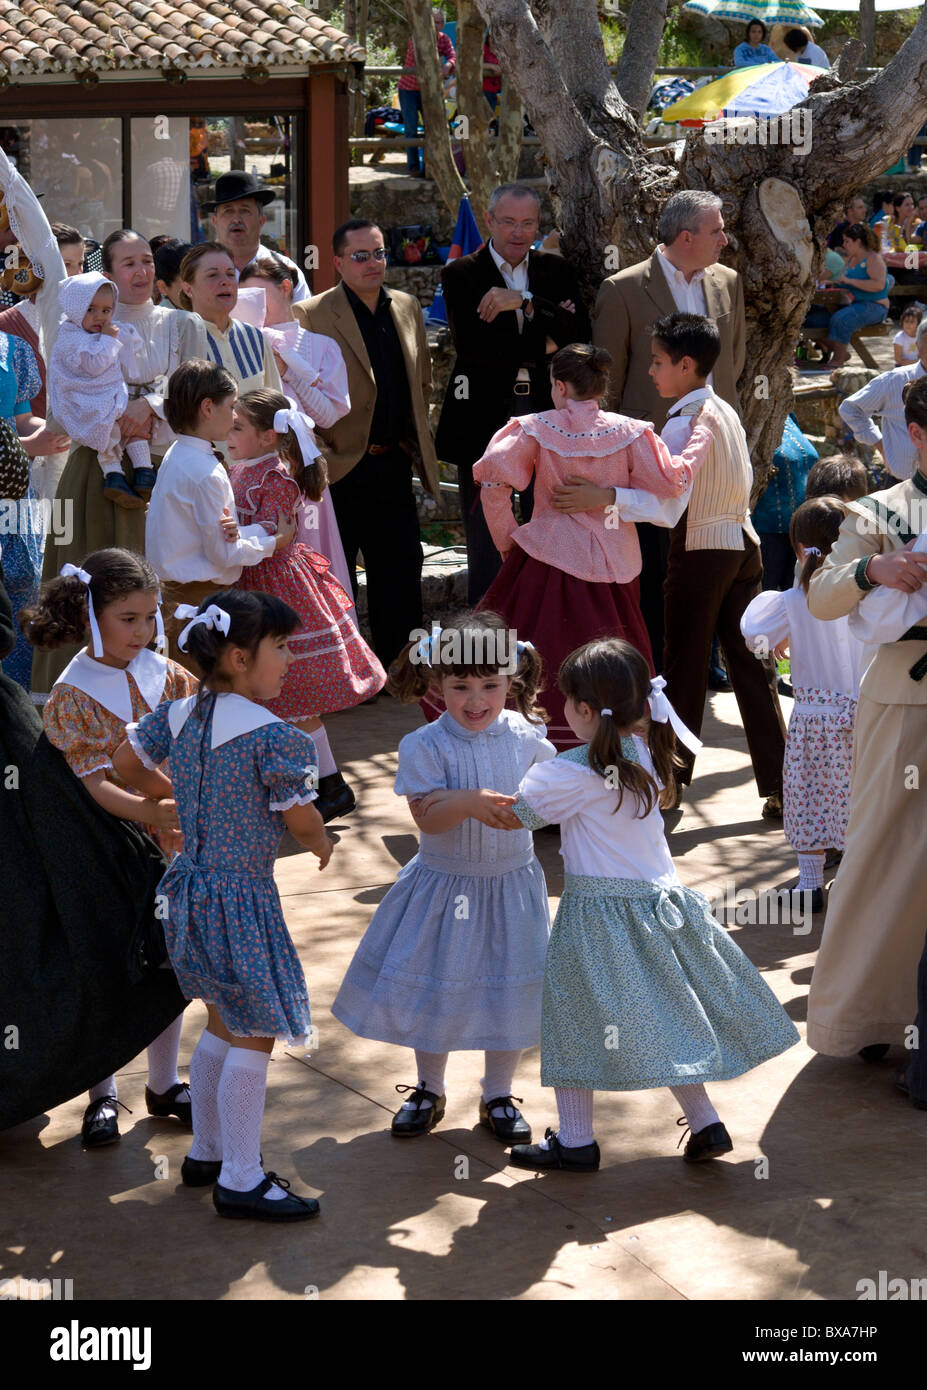 Portugal, the Algarve, Folk dancing festival at Alte, the local dance school performing Stock Photo